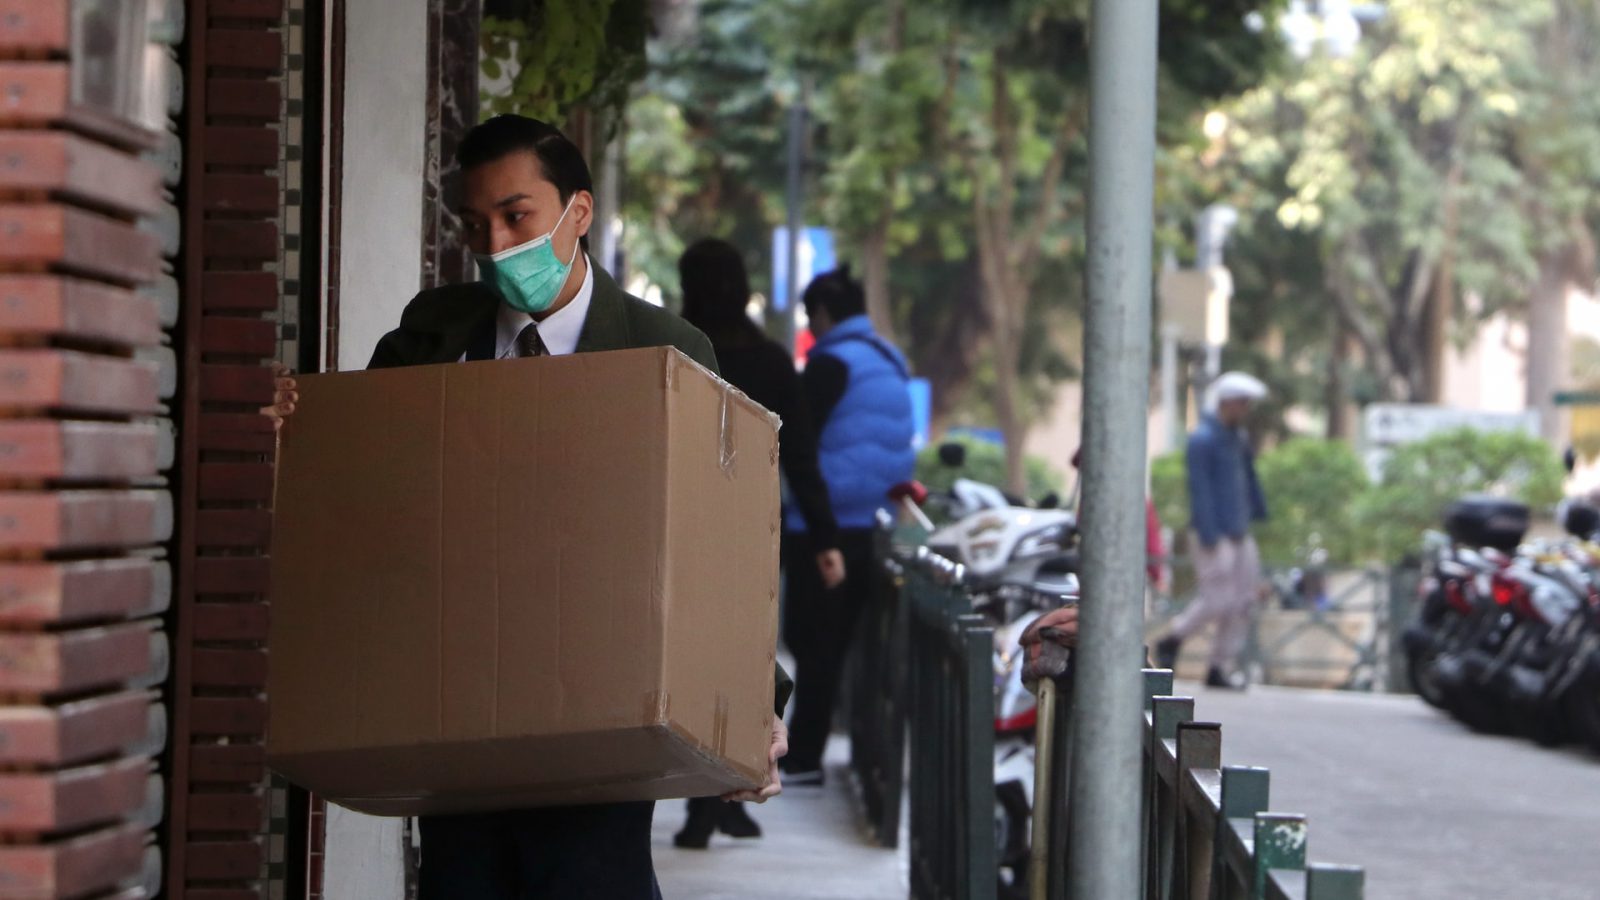 A man in a suit wearing a mask and carrying a box representing an employee let go during the pandemic